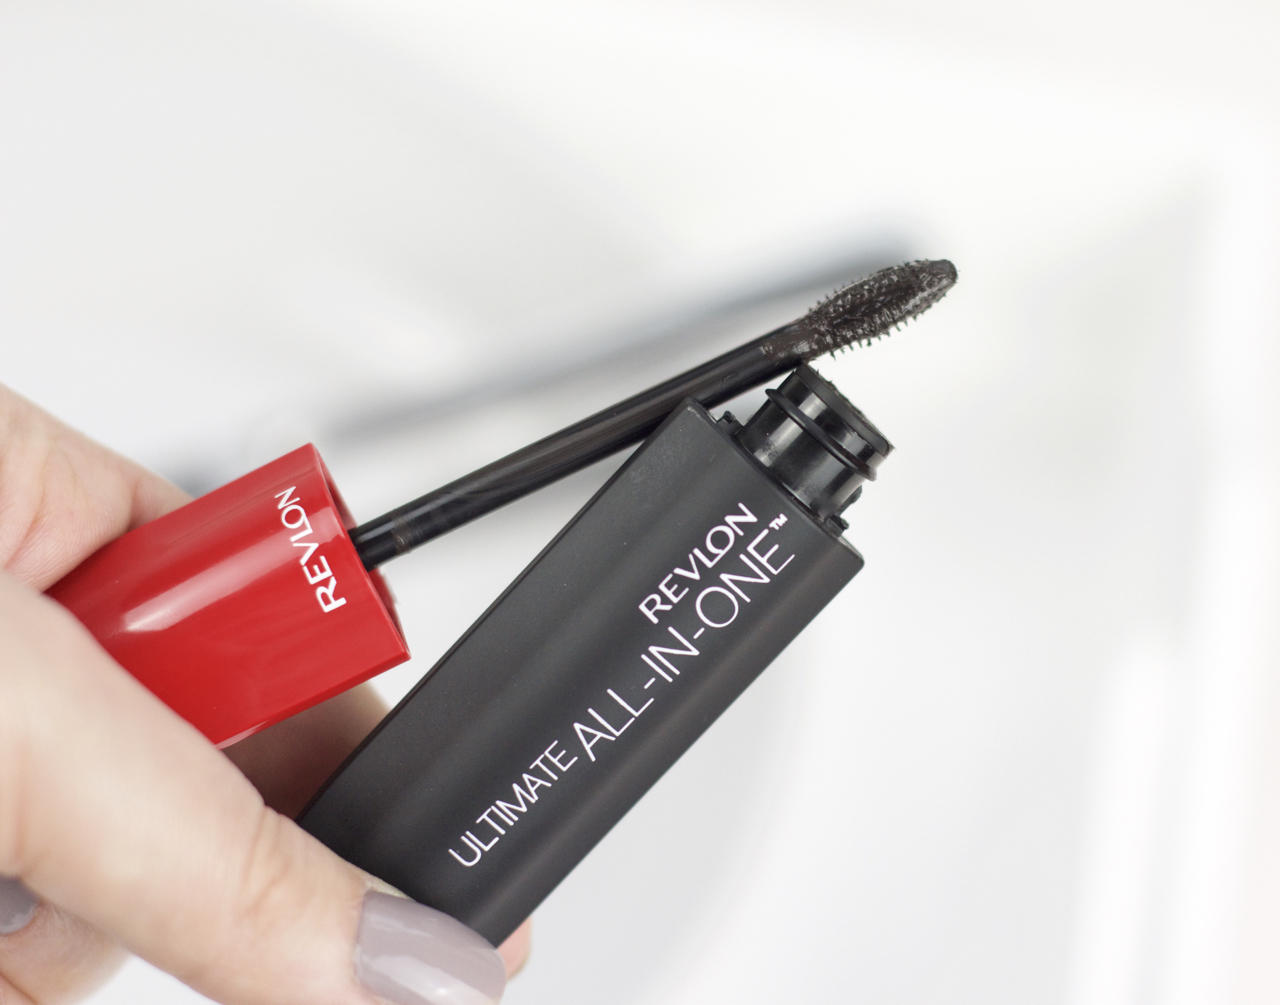 Made From Beauty Revlon Ultimate All-In-One Mascara Brush